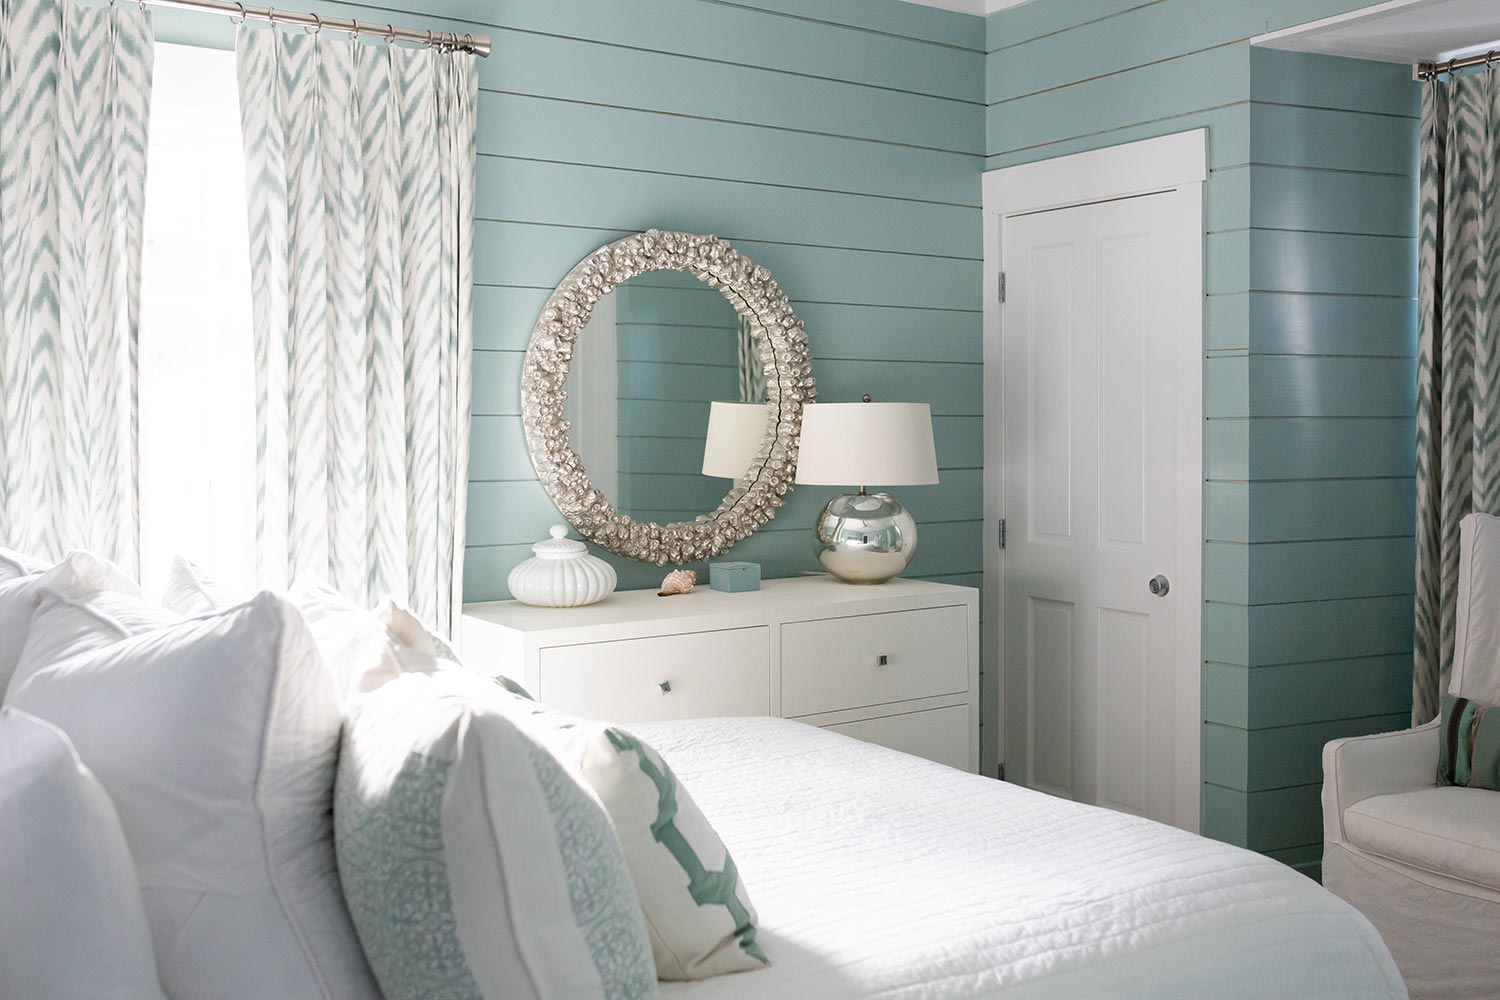 Modern beach house bedroom with teal walls